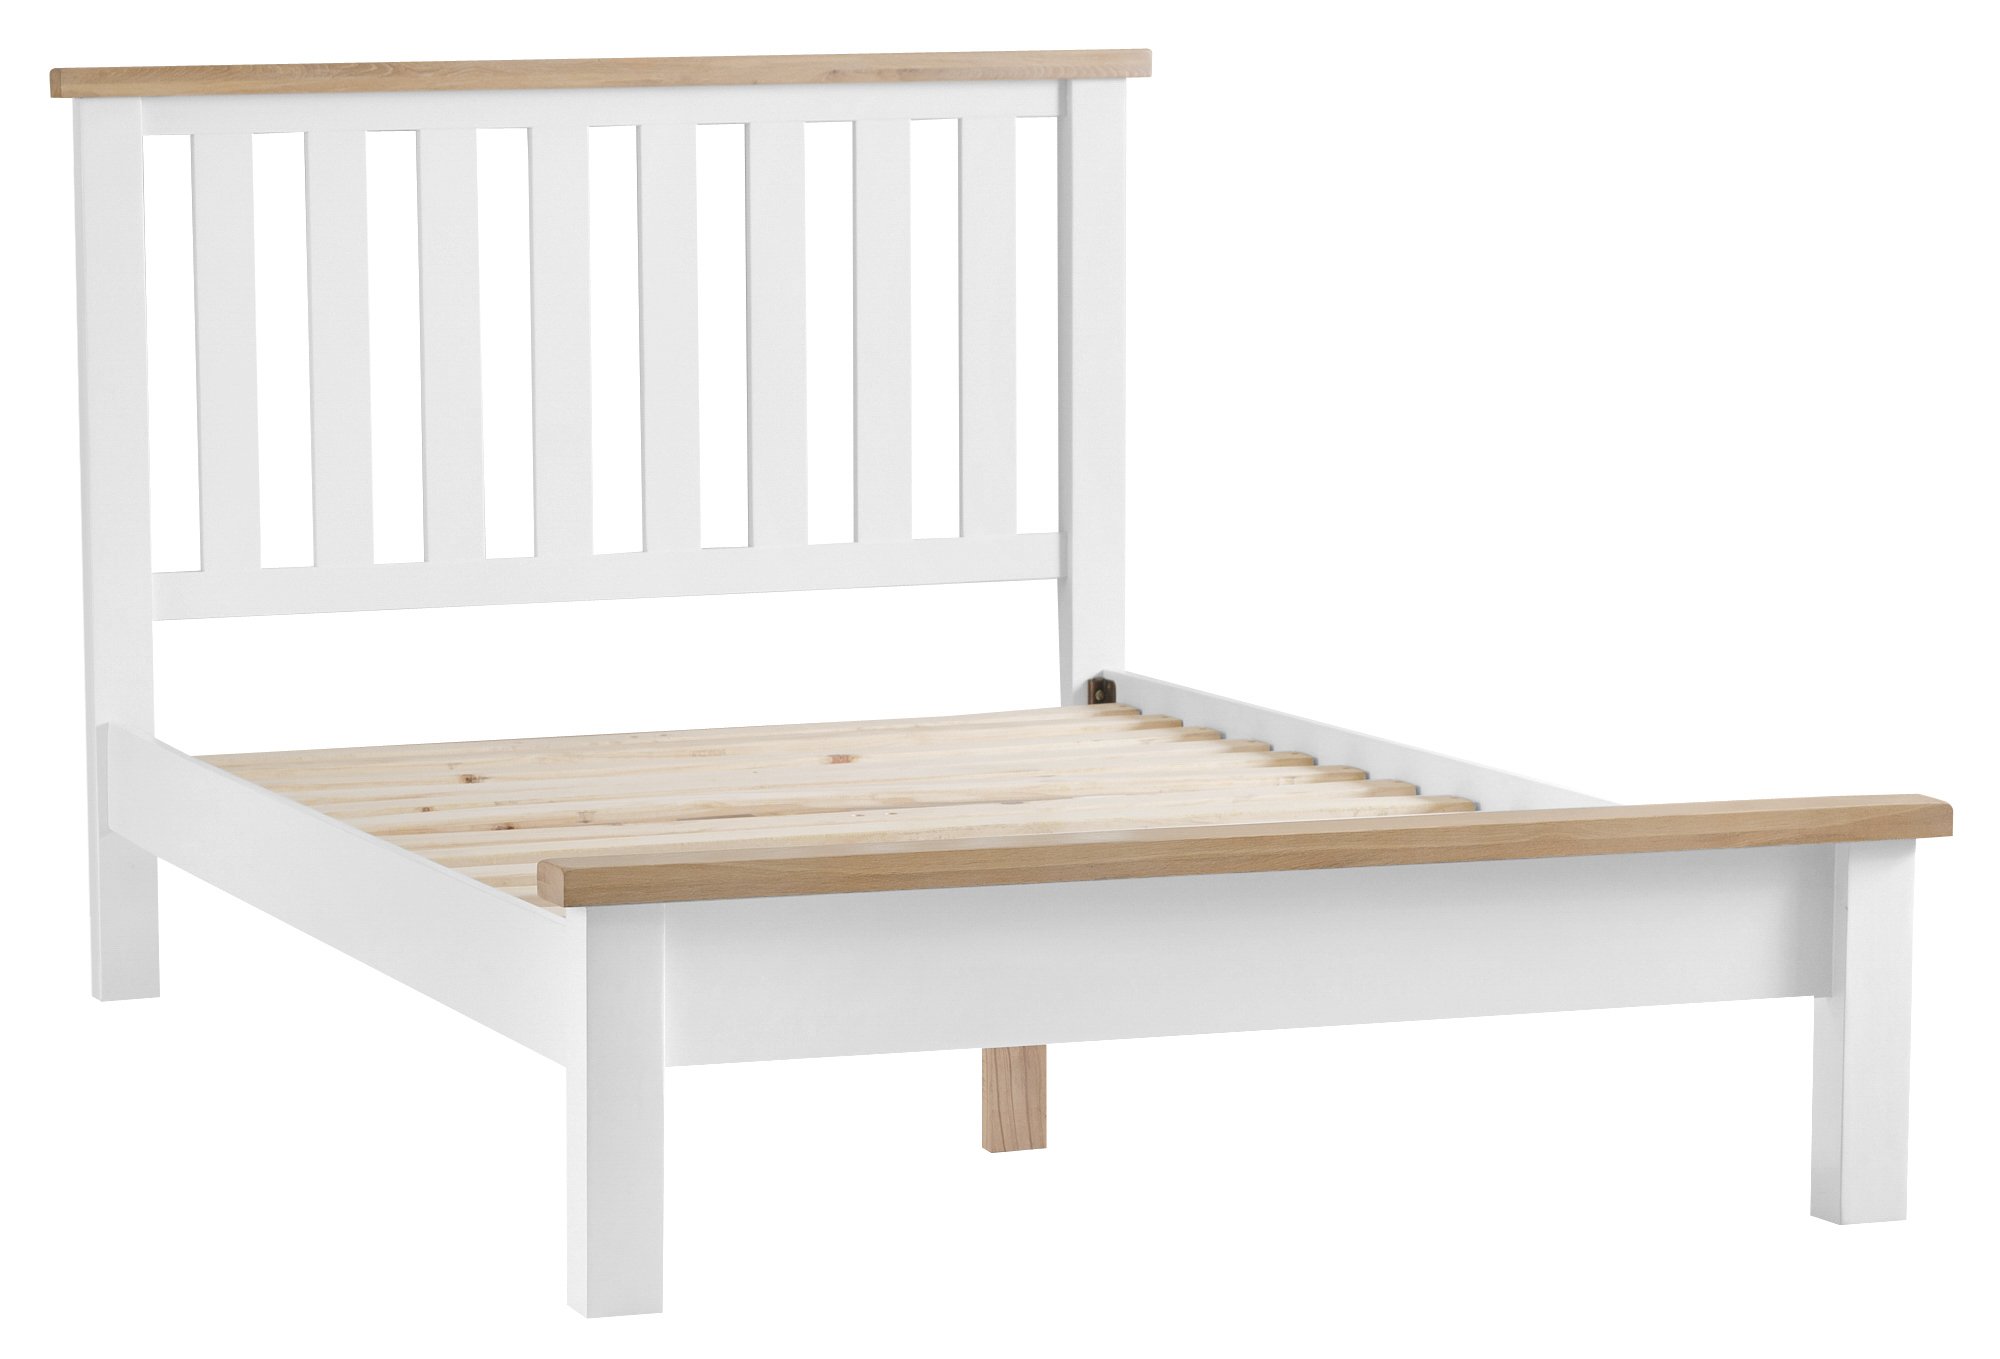 Kettering White Bedroom Double Bed Frame The Clearance Zone